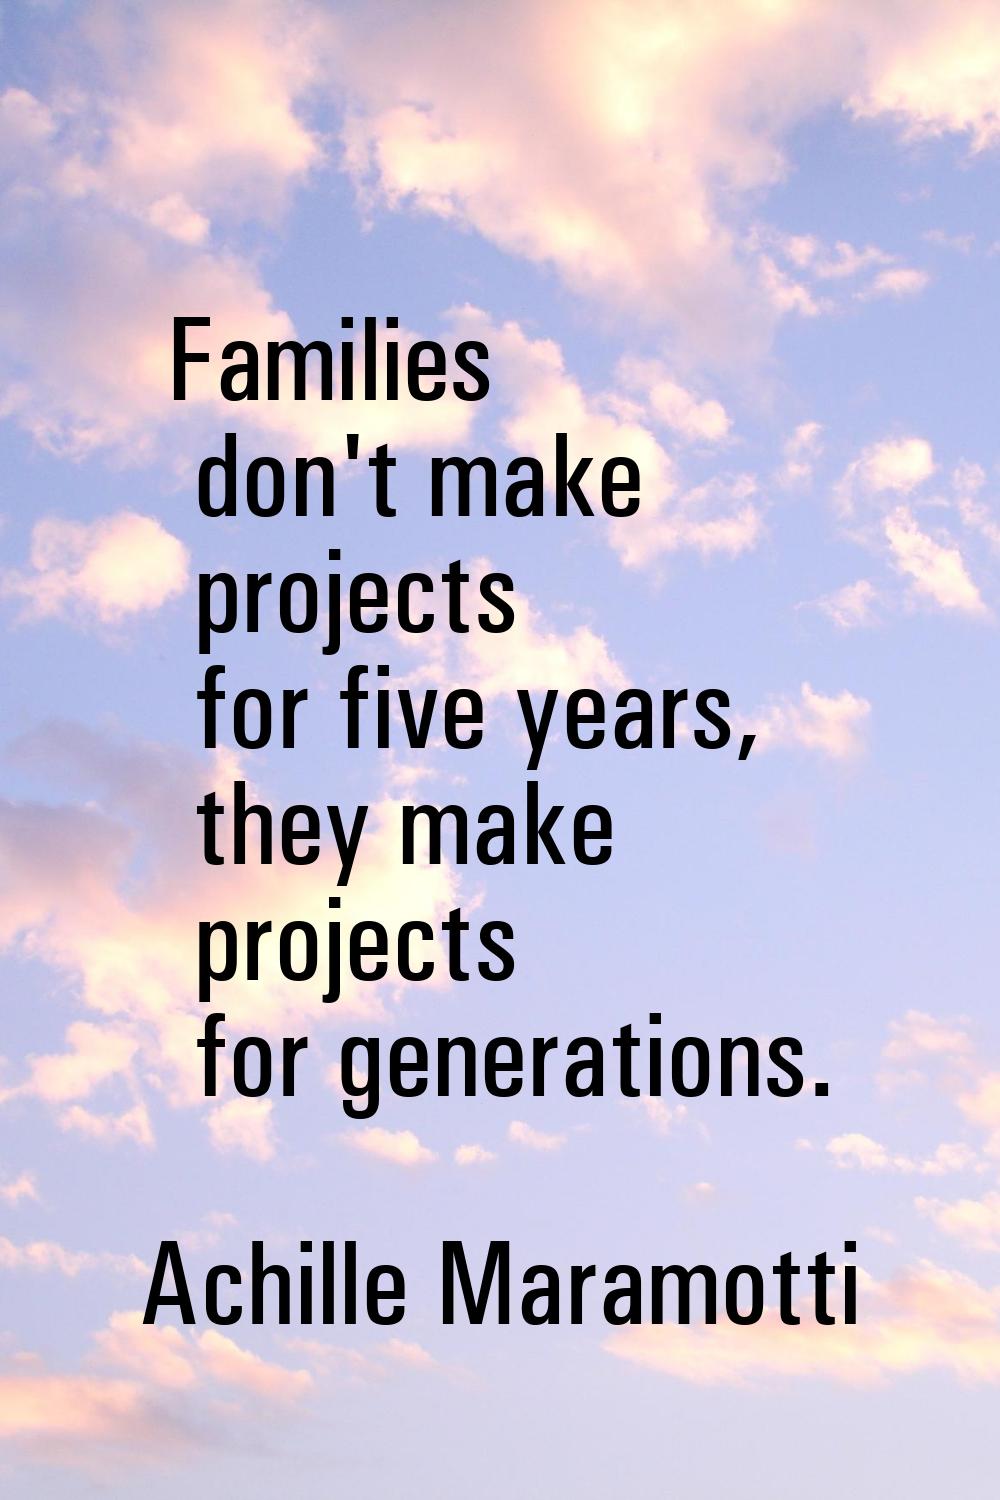 Families don't make projects for five years, they make projects for generations.